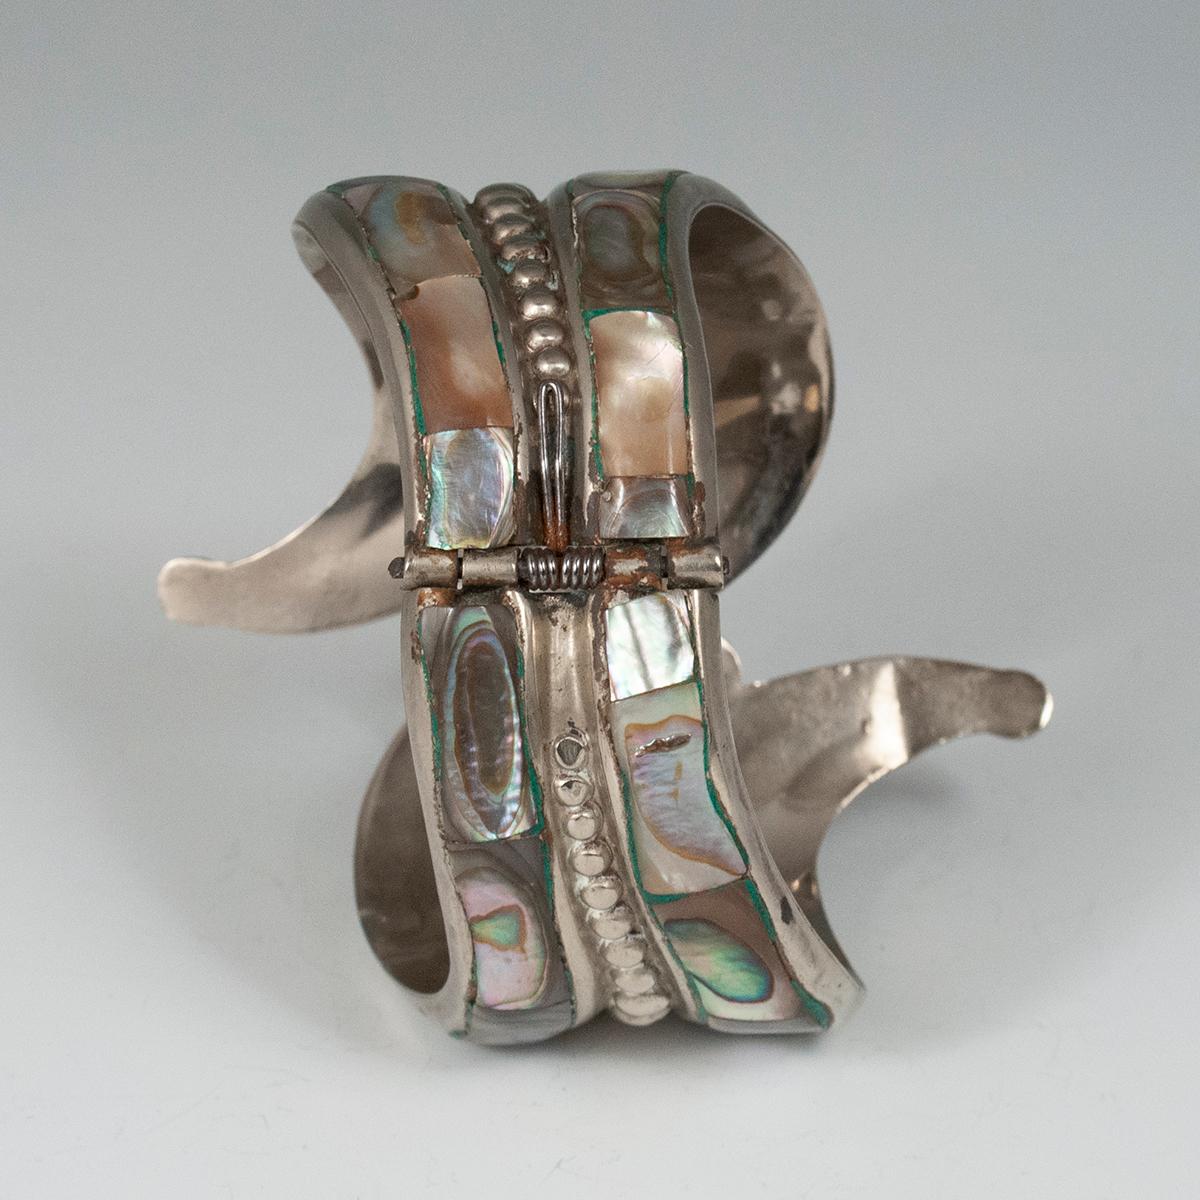 Mexican 1980s Abalone and Silver Clamper Bracelet, Taxco, Mexico